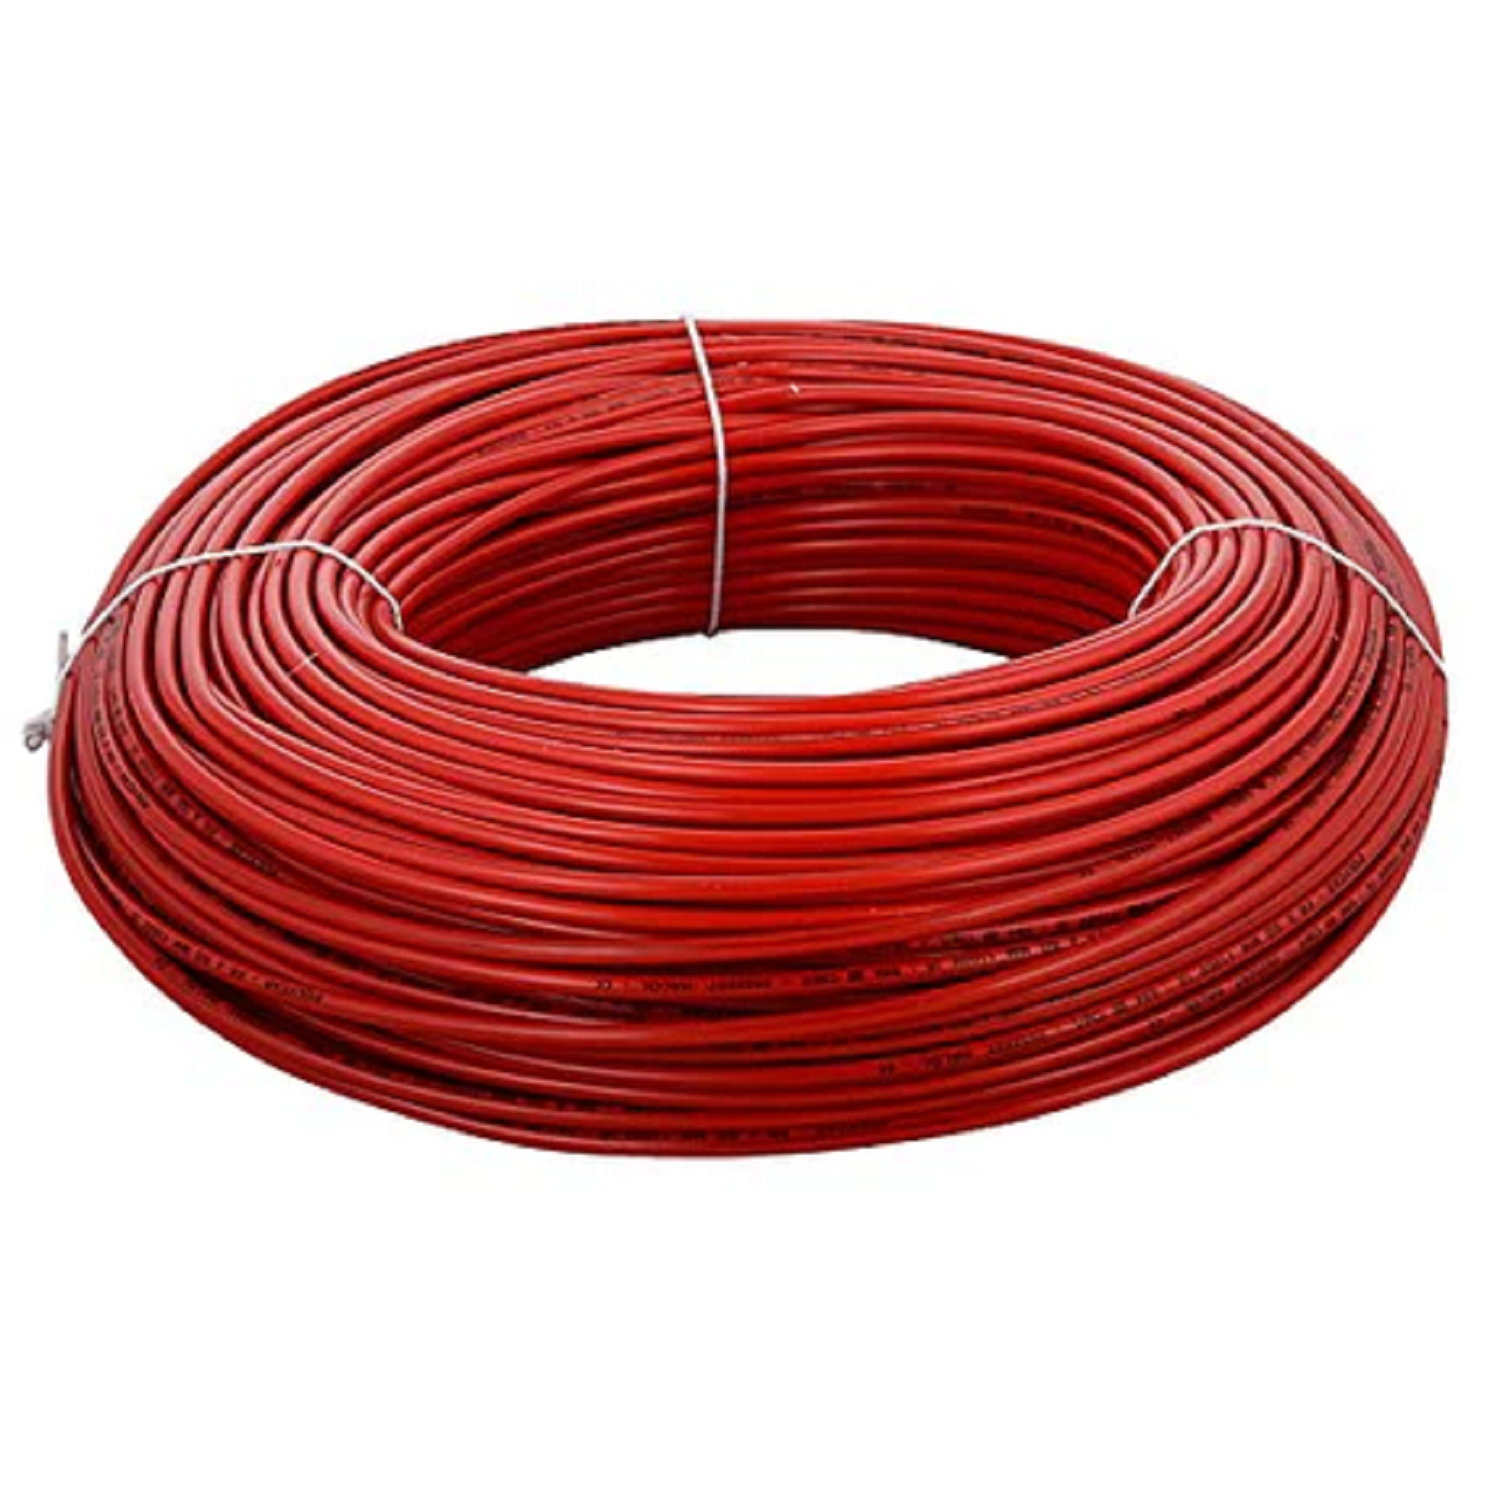 Polycab FR-LS 1 SQ-MM, (300 Meters) PVC Insulated Copper Wire Single Core (Red)